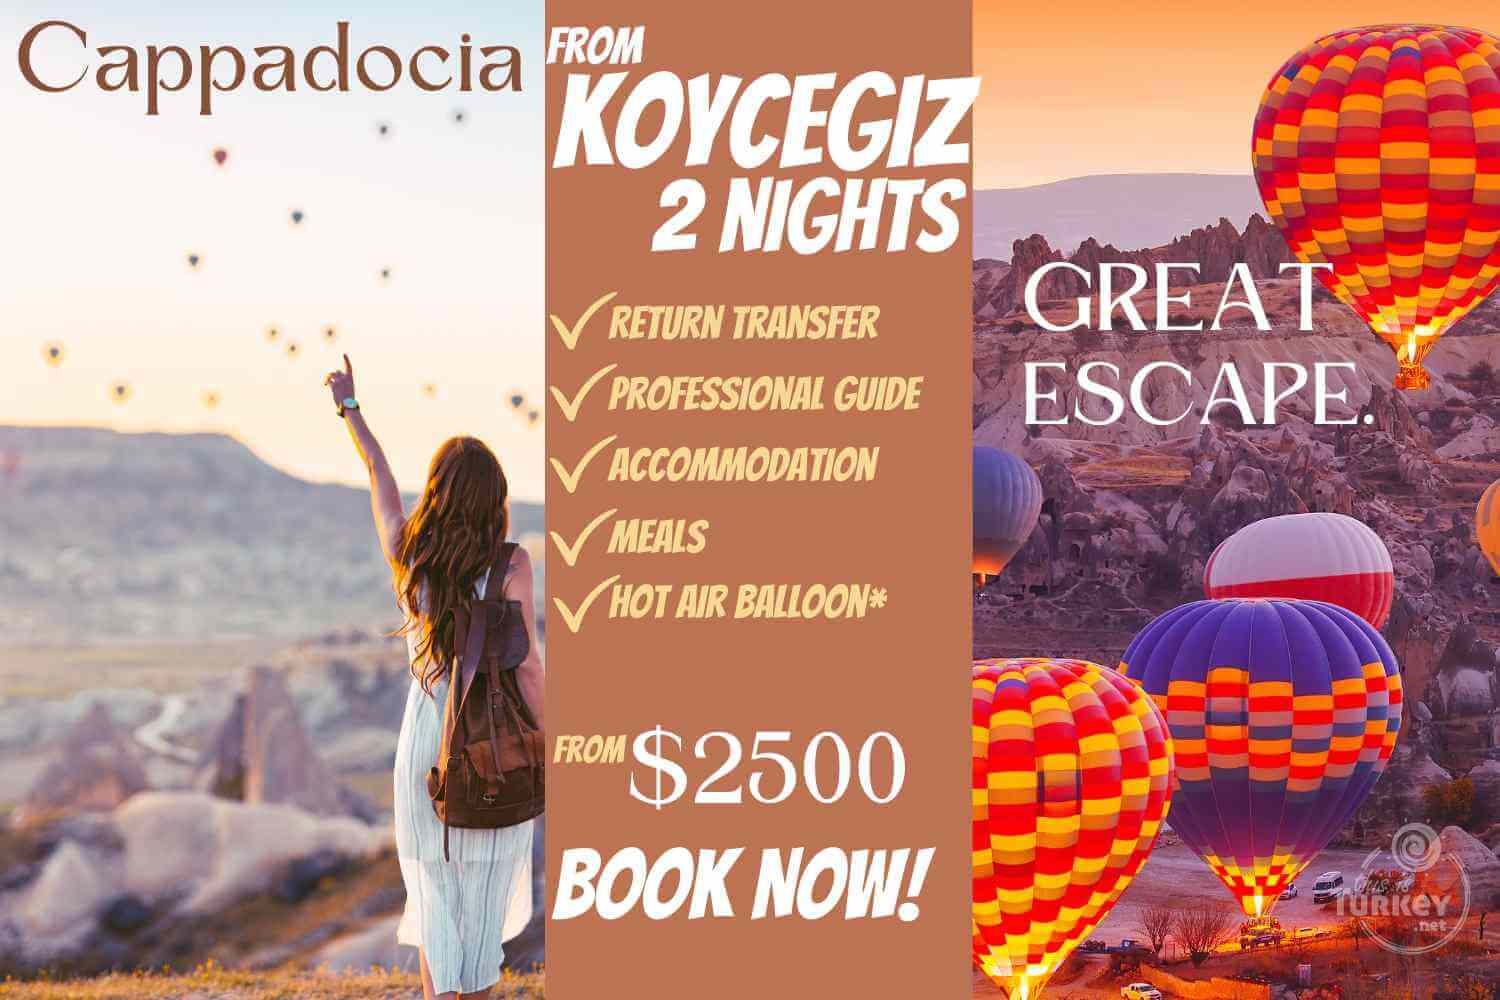 from Koycegiz to Cappadocia, 2 nights, accommodation and return transfer included with professional tour guide and meals. Hot air Balloon ride included in the program